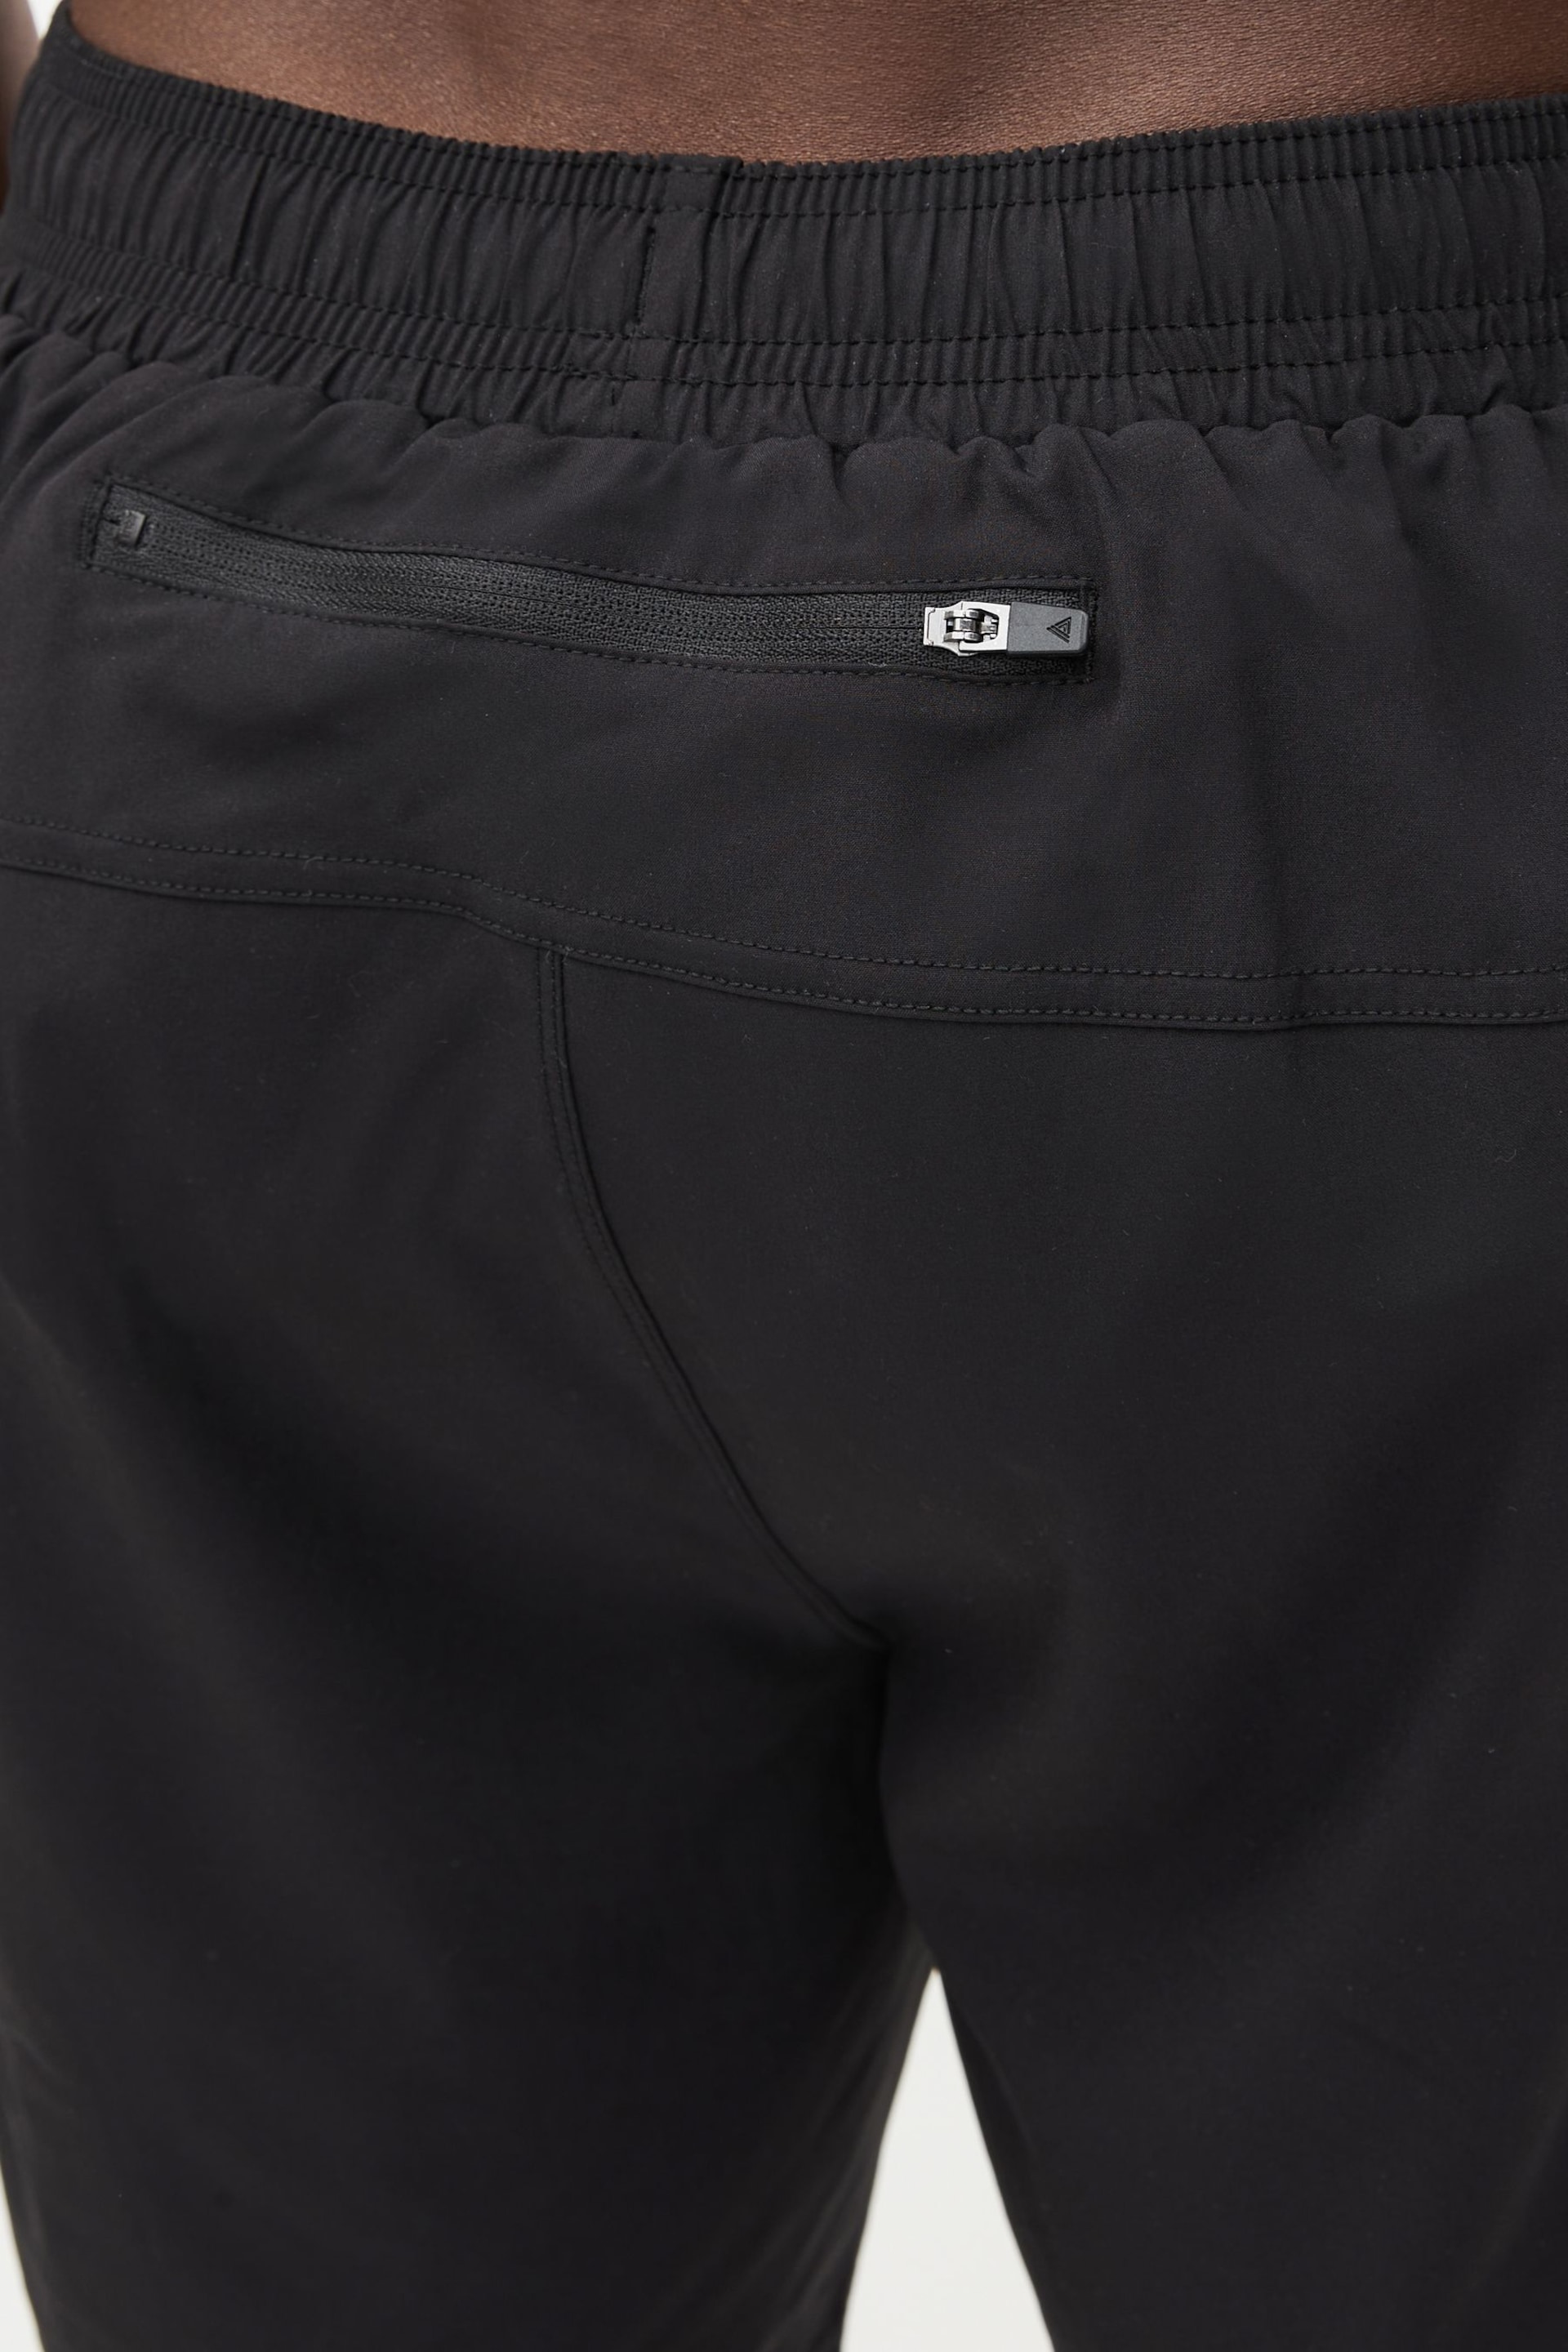 Black Training Shorts With Liner - Image 6 of 11